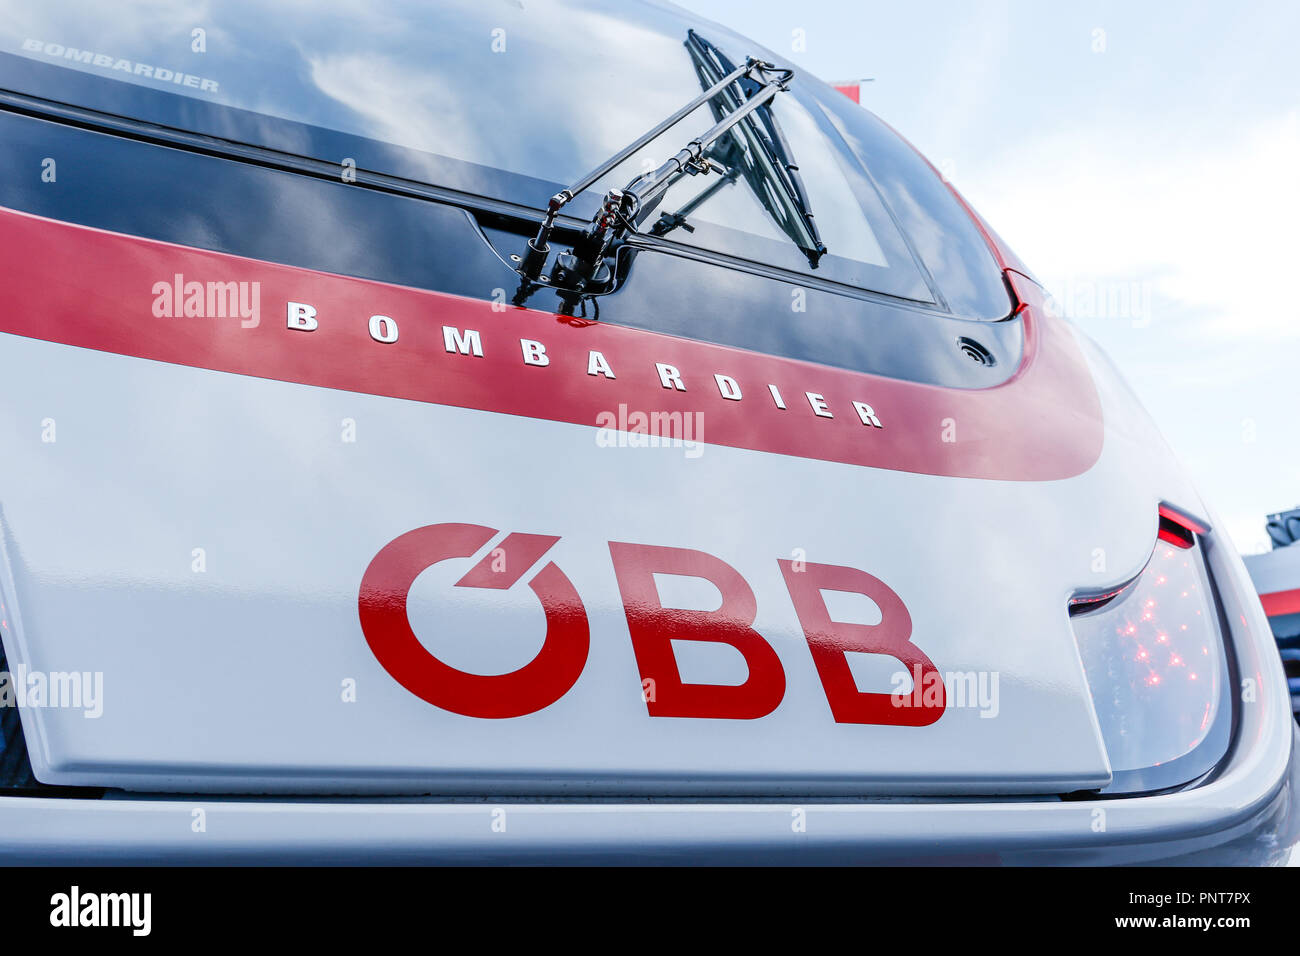 The first new generation 21 …BB Cityjets are to be deployed in Vorarlberg starting in 2019. Tirol also follows suit with 25 …BB Cityjets TALENT 3 ordered in July 2018, the first of which scheduled to be on rails starting in 2020. All vehicles in Austria and Germany will receive unrestricted registration, with six of the 25 vehicles in Tyrol also being registered in Italy so that cross-border traffic to South Tyrol will be possible without changing trains at the Brenner Pass. The first finished train is showcased together with the manufacturer Bombardier Transportation at InnoTrans Ð the intern Stock Photo